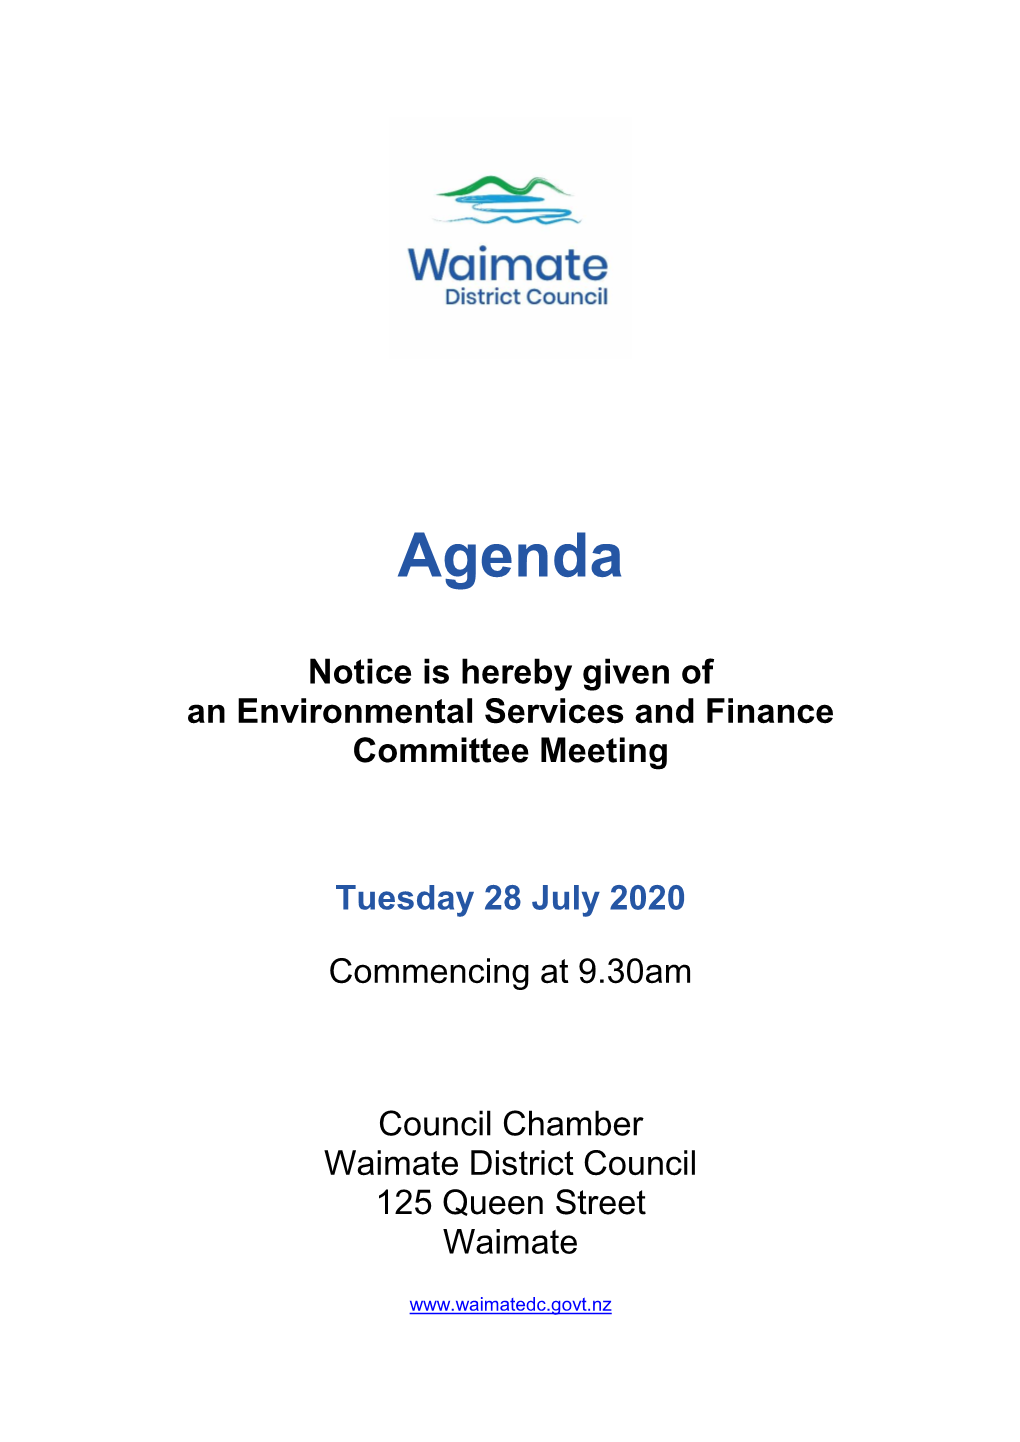 Agenda of Environmental Services and Finance Committee Meeting